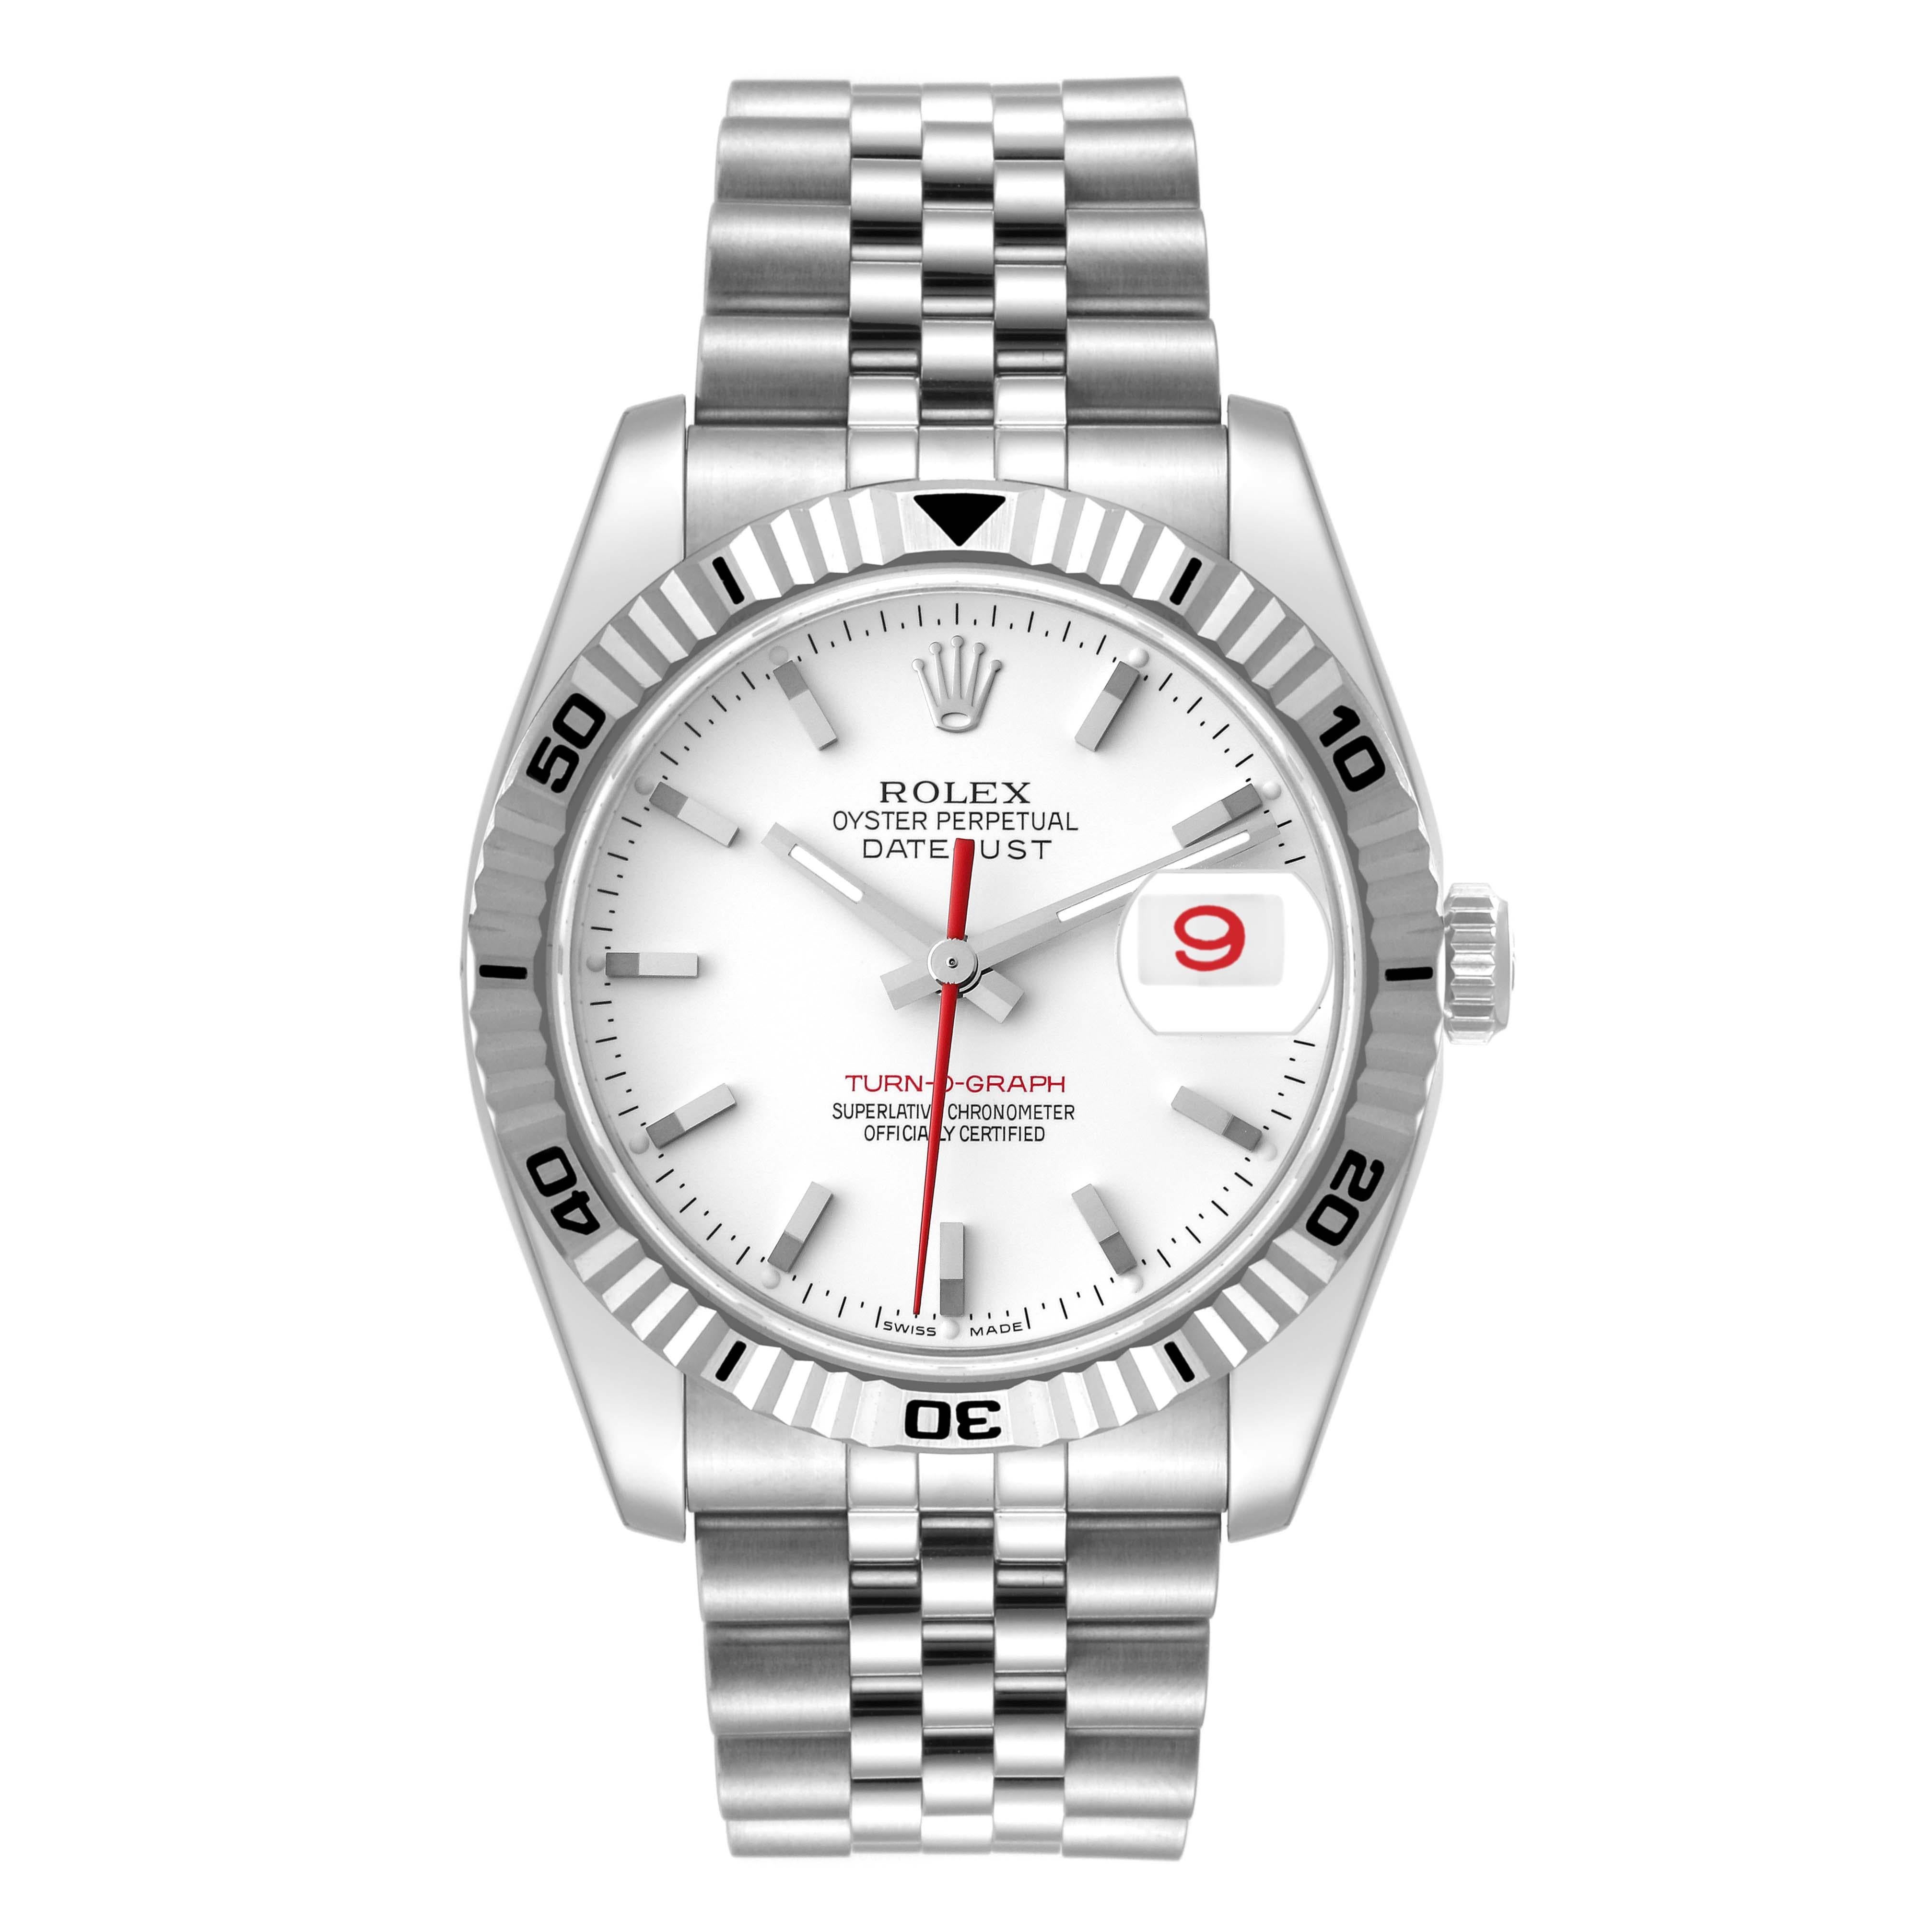 Rolex Turnograph Steel White Gold Bezel Mens Watch 116264. Officially certified chronometer self-winding movement with quickset date function. Stainless steel round case 36 mm in diameter. Rolex logo on a crown. 18k white gold fluted bidirectional